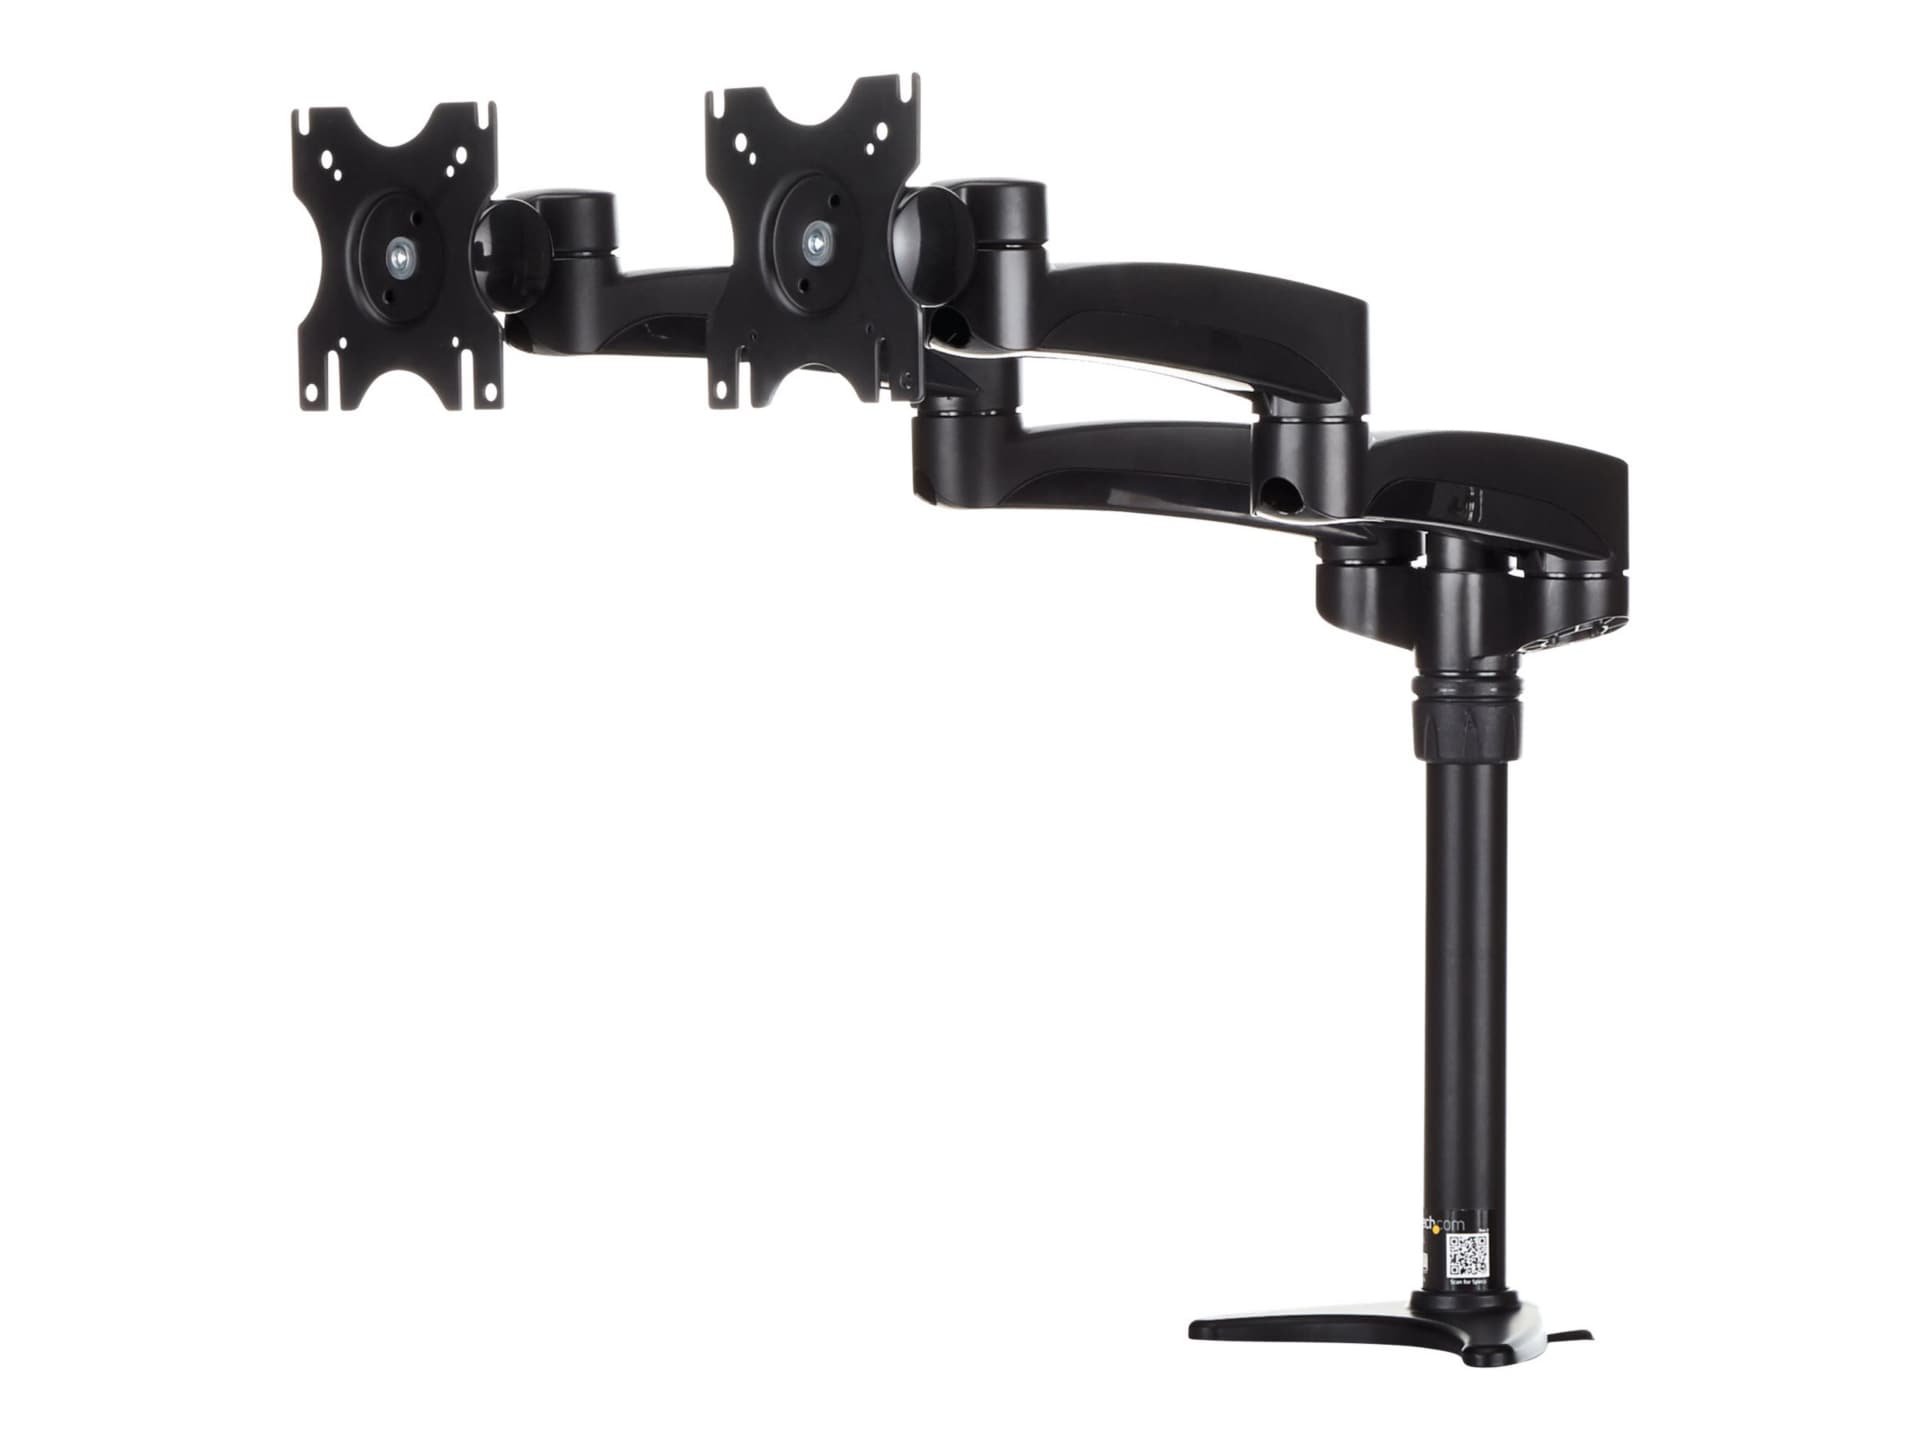 StarTech.com Desk Mount Dual Monitor Arm - Articulating - Up to 24" Monitor